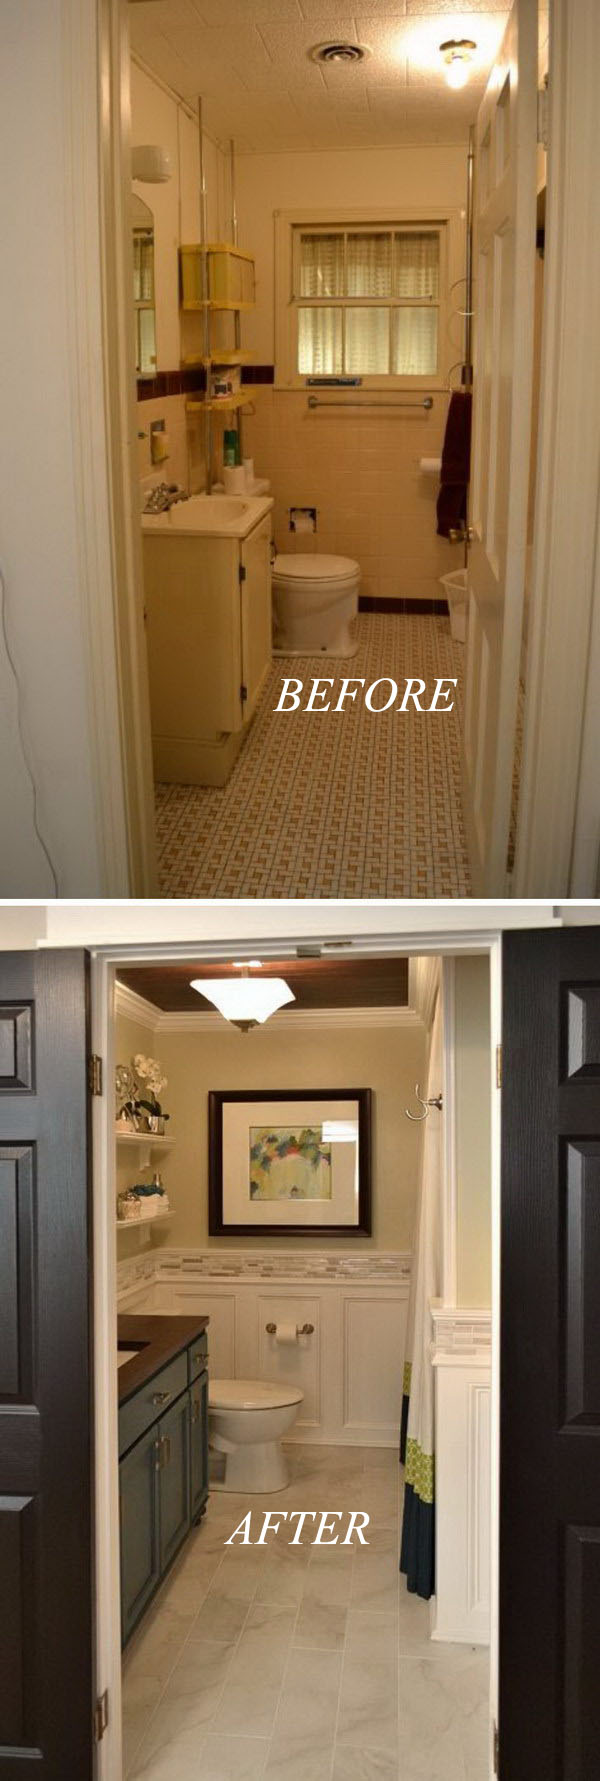 41-42-bathroom-remodel-before-and-after